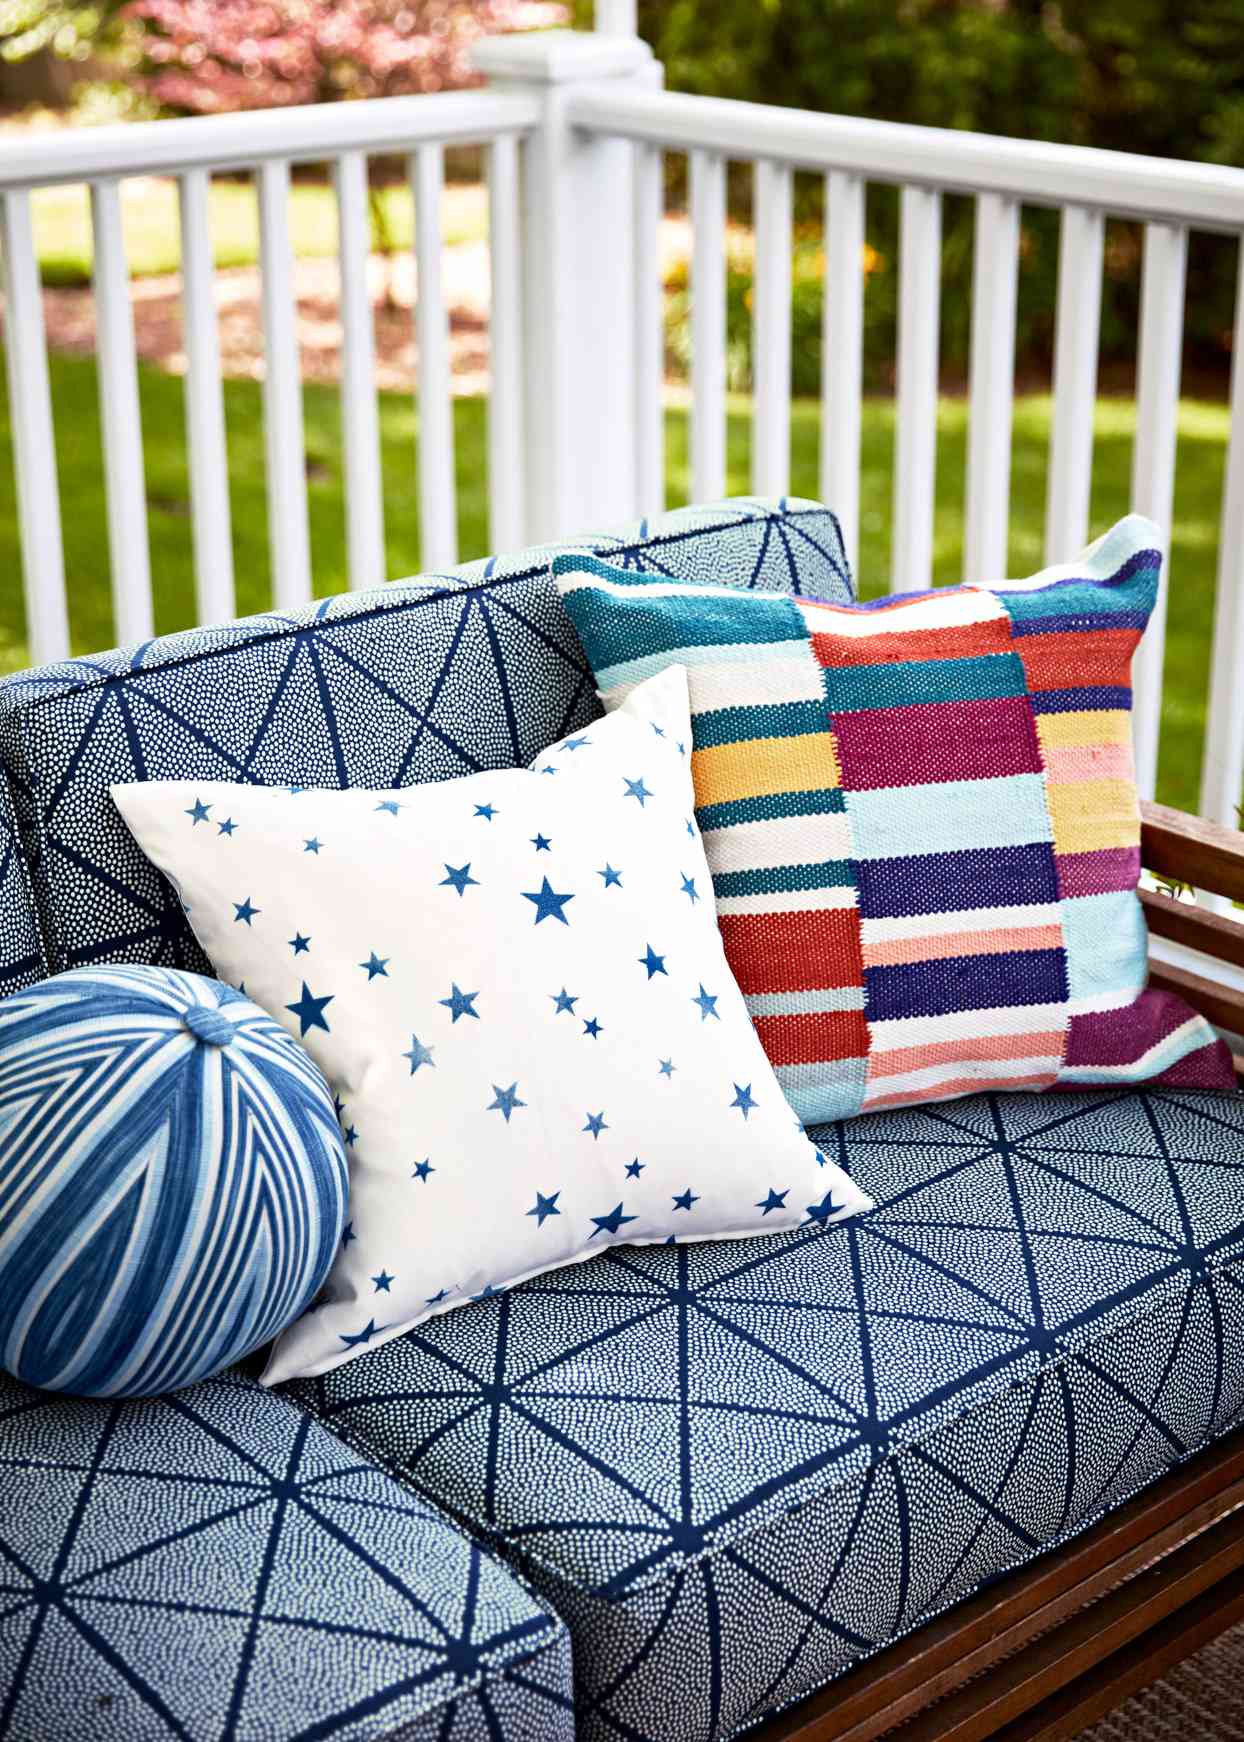 blue pattered outdoor seating with decorative pillows